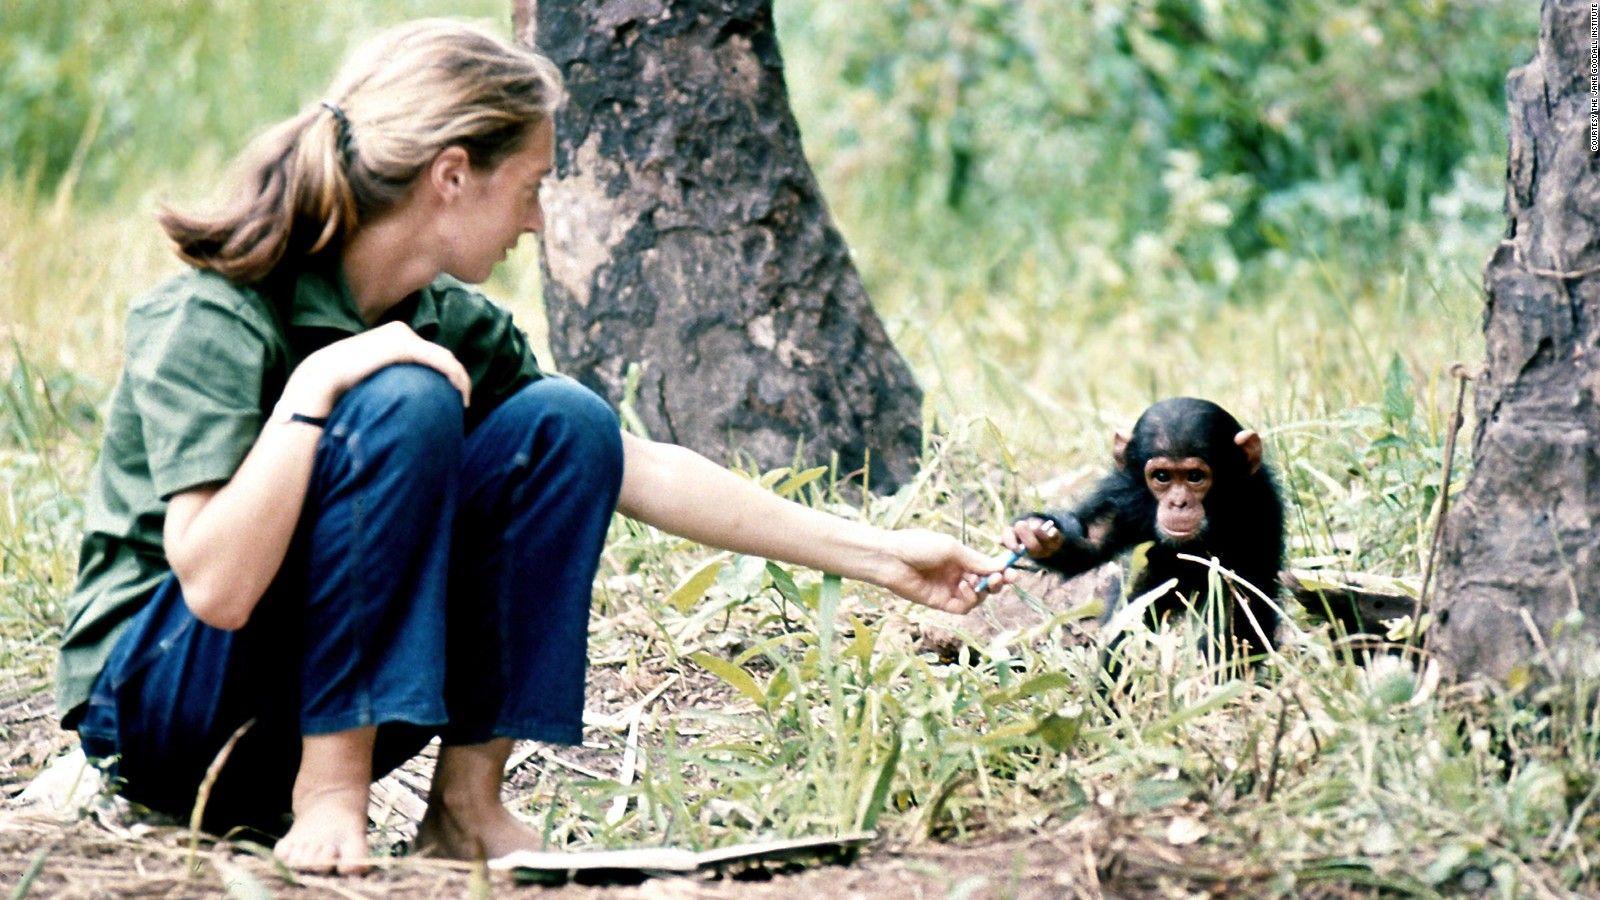 Jane Goodall: A lifetime in the field